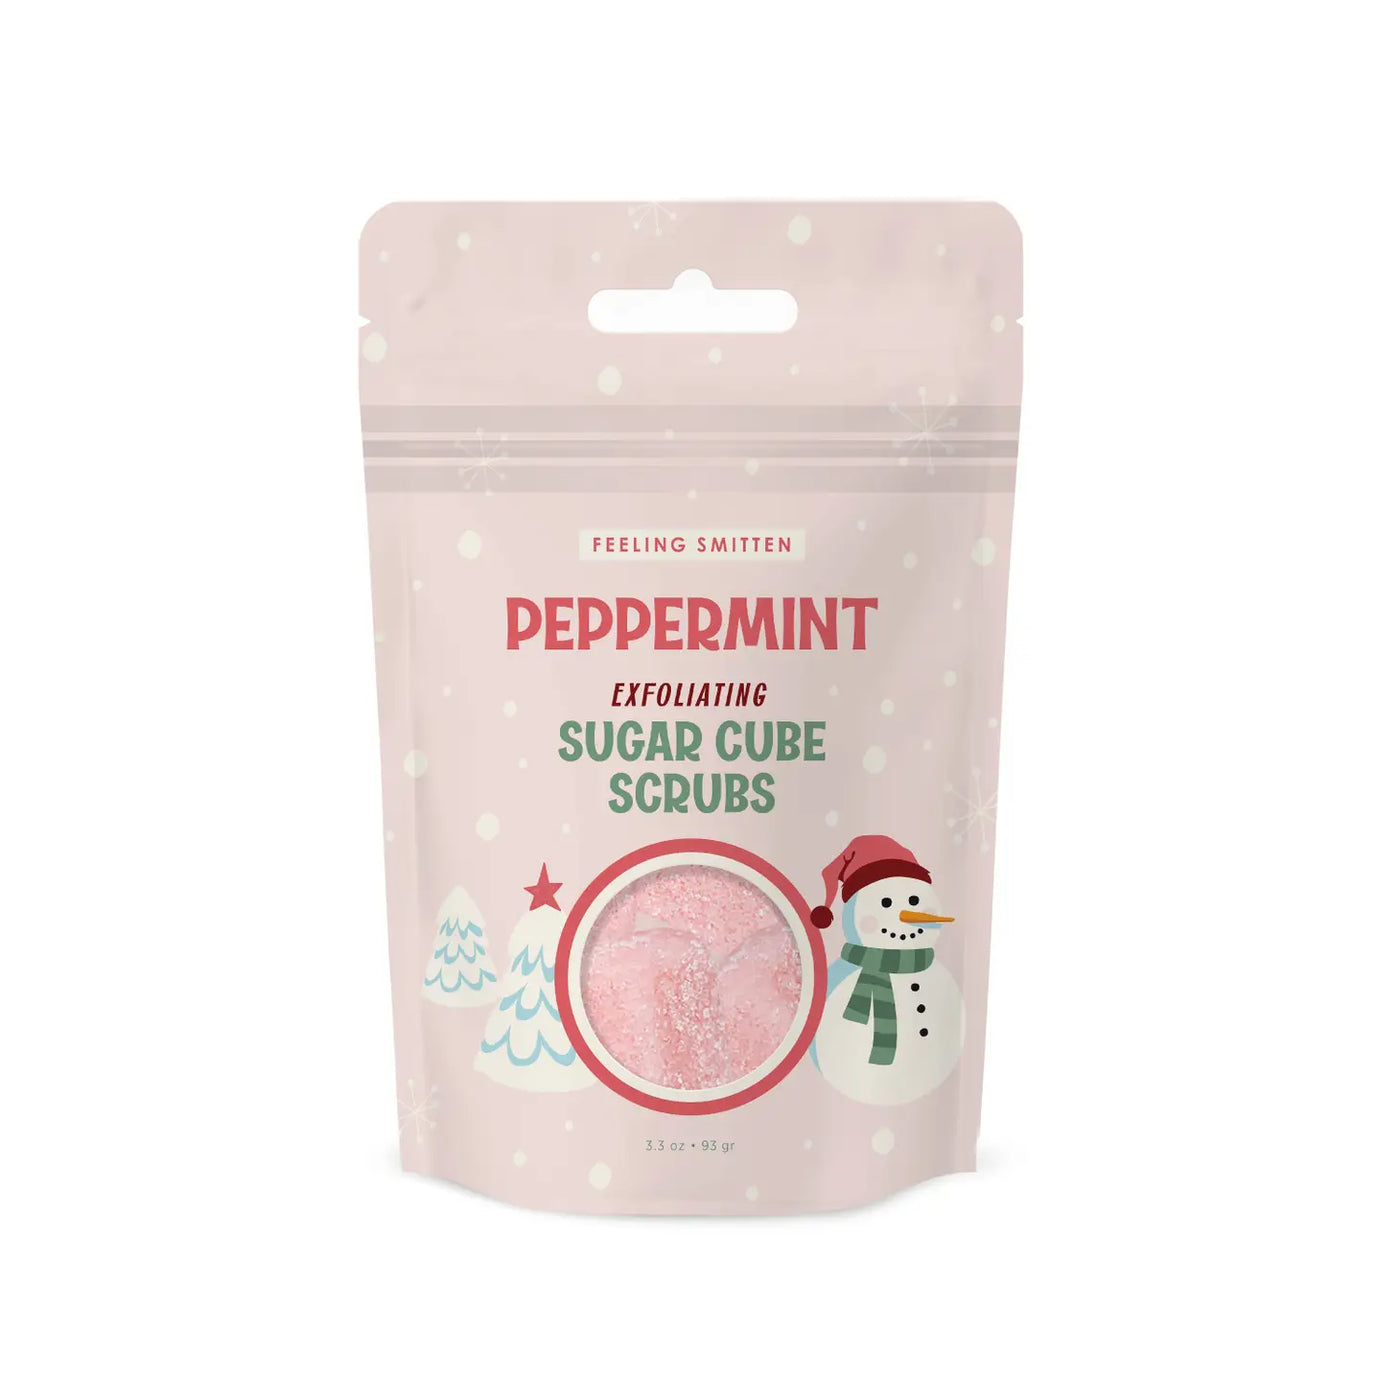 Peppermint sugar scrubs exfoliating gift holidays christmas winter for her gift idea